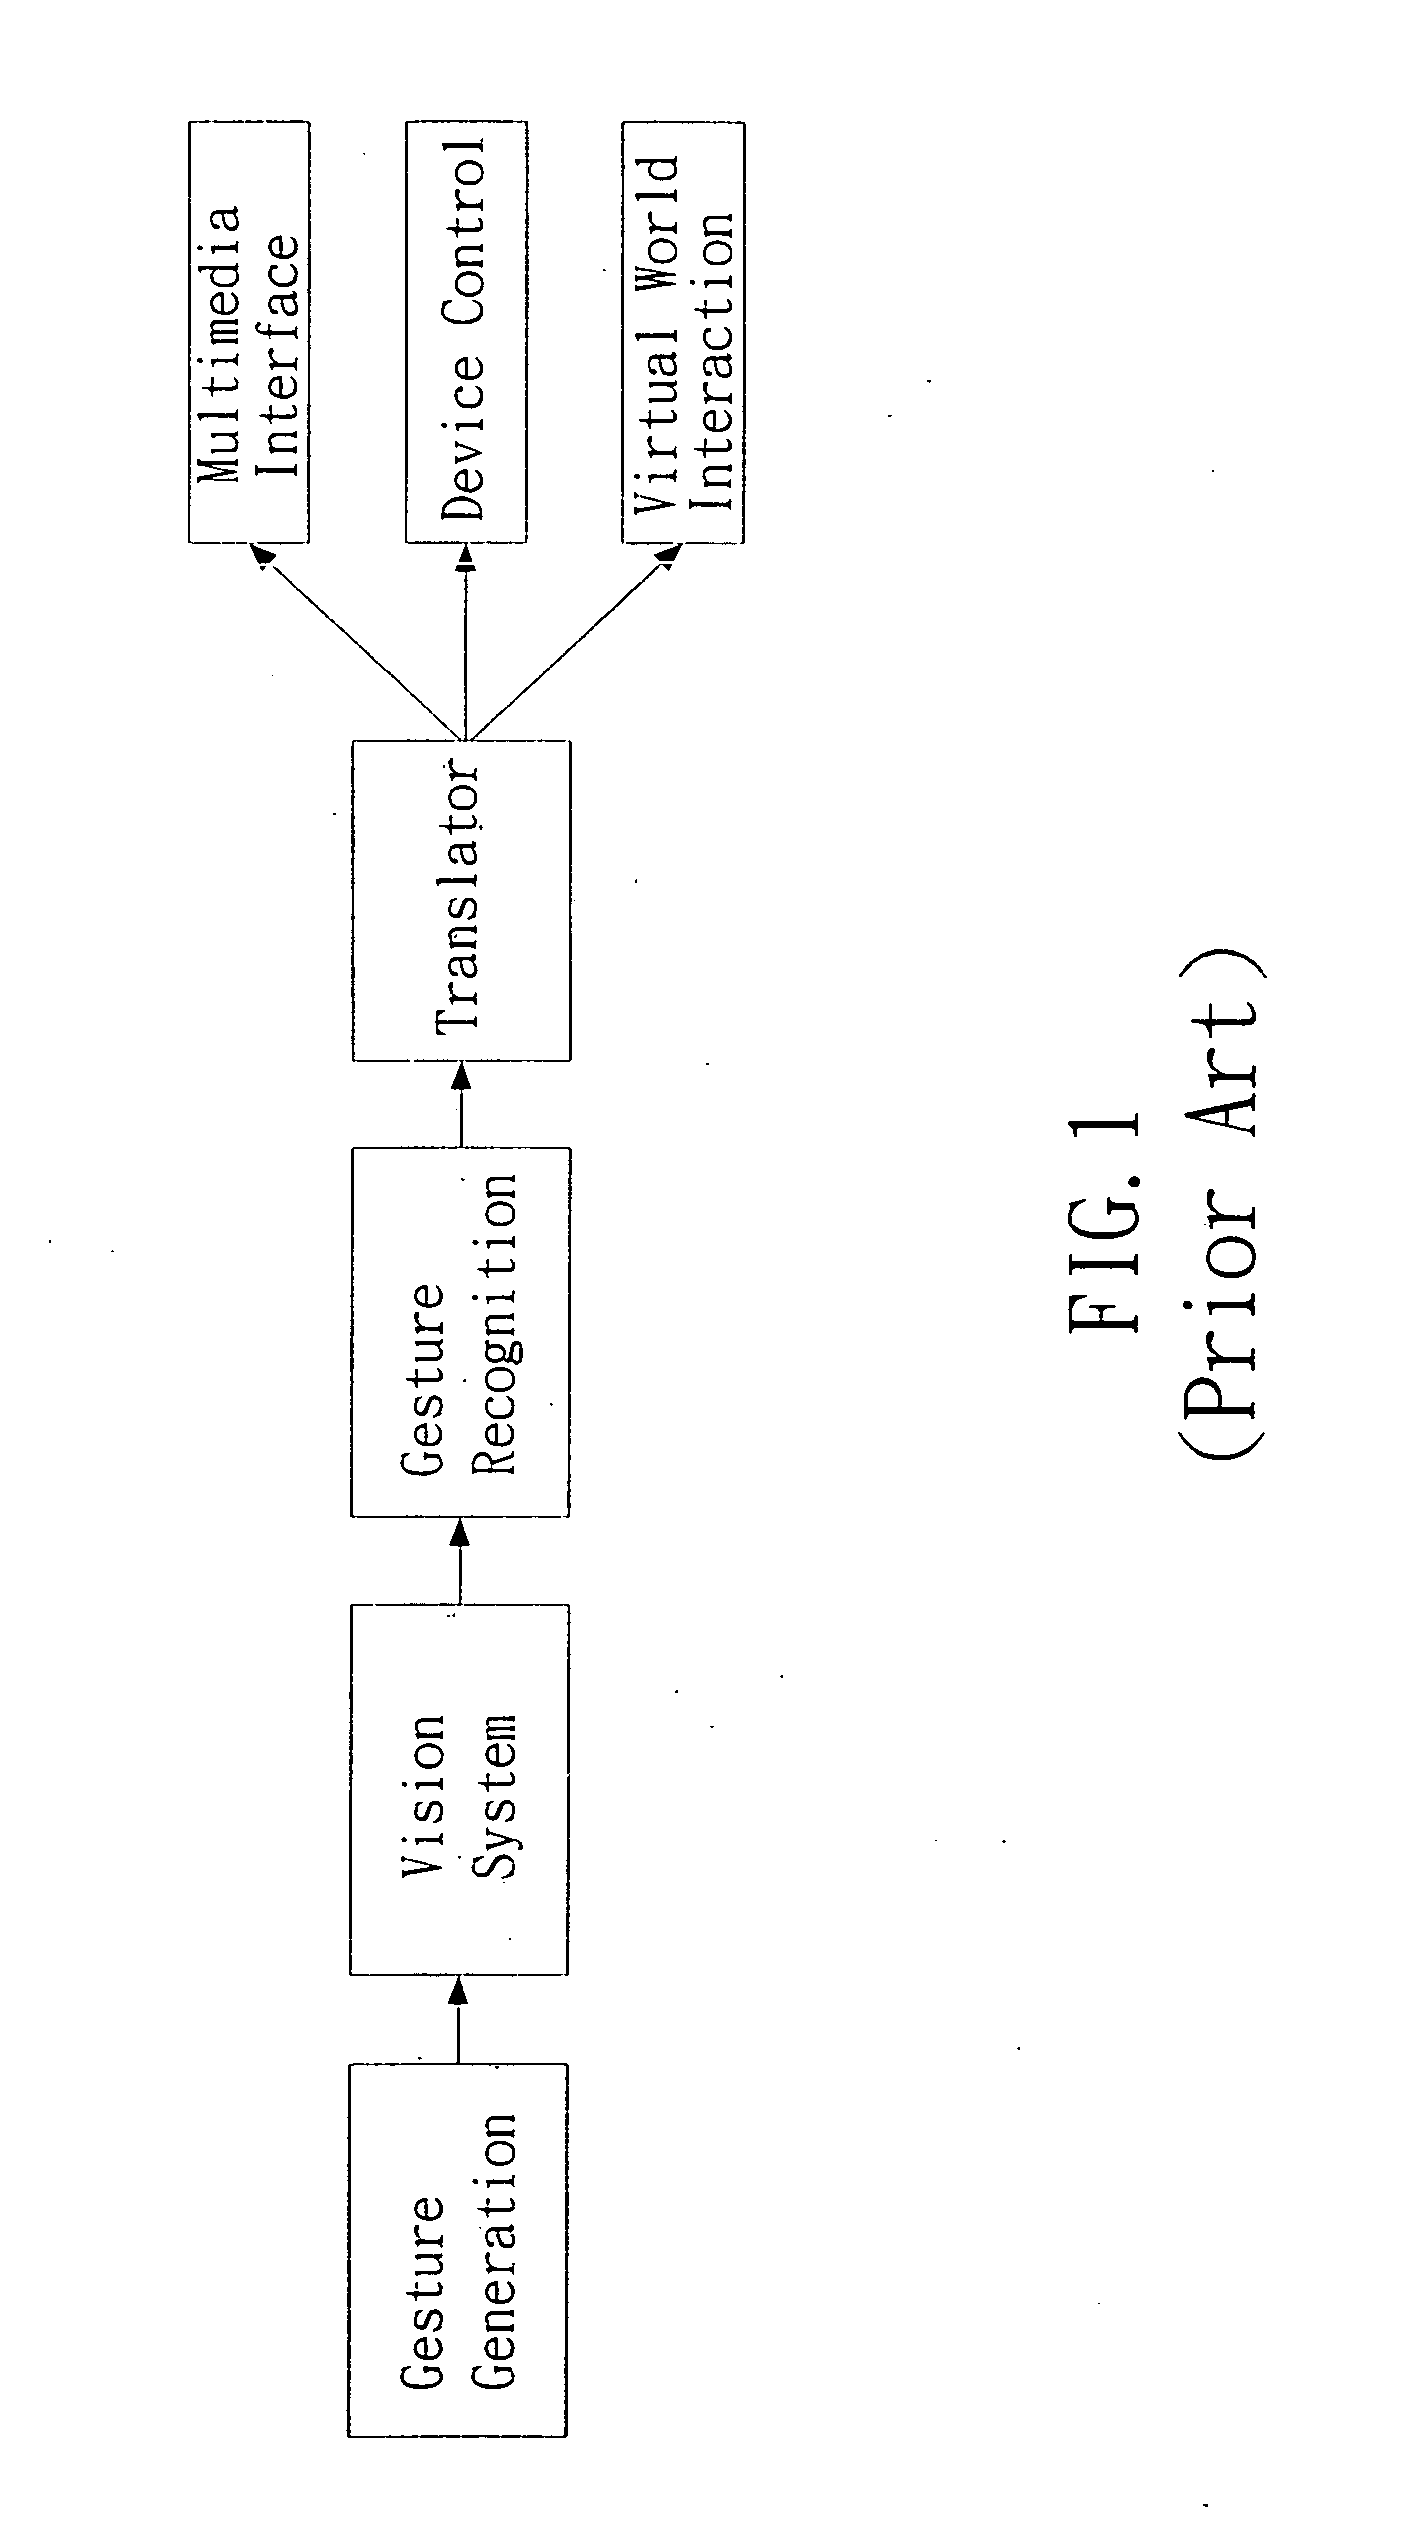 Motion recognition system and method for controlling electronic devices